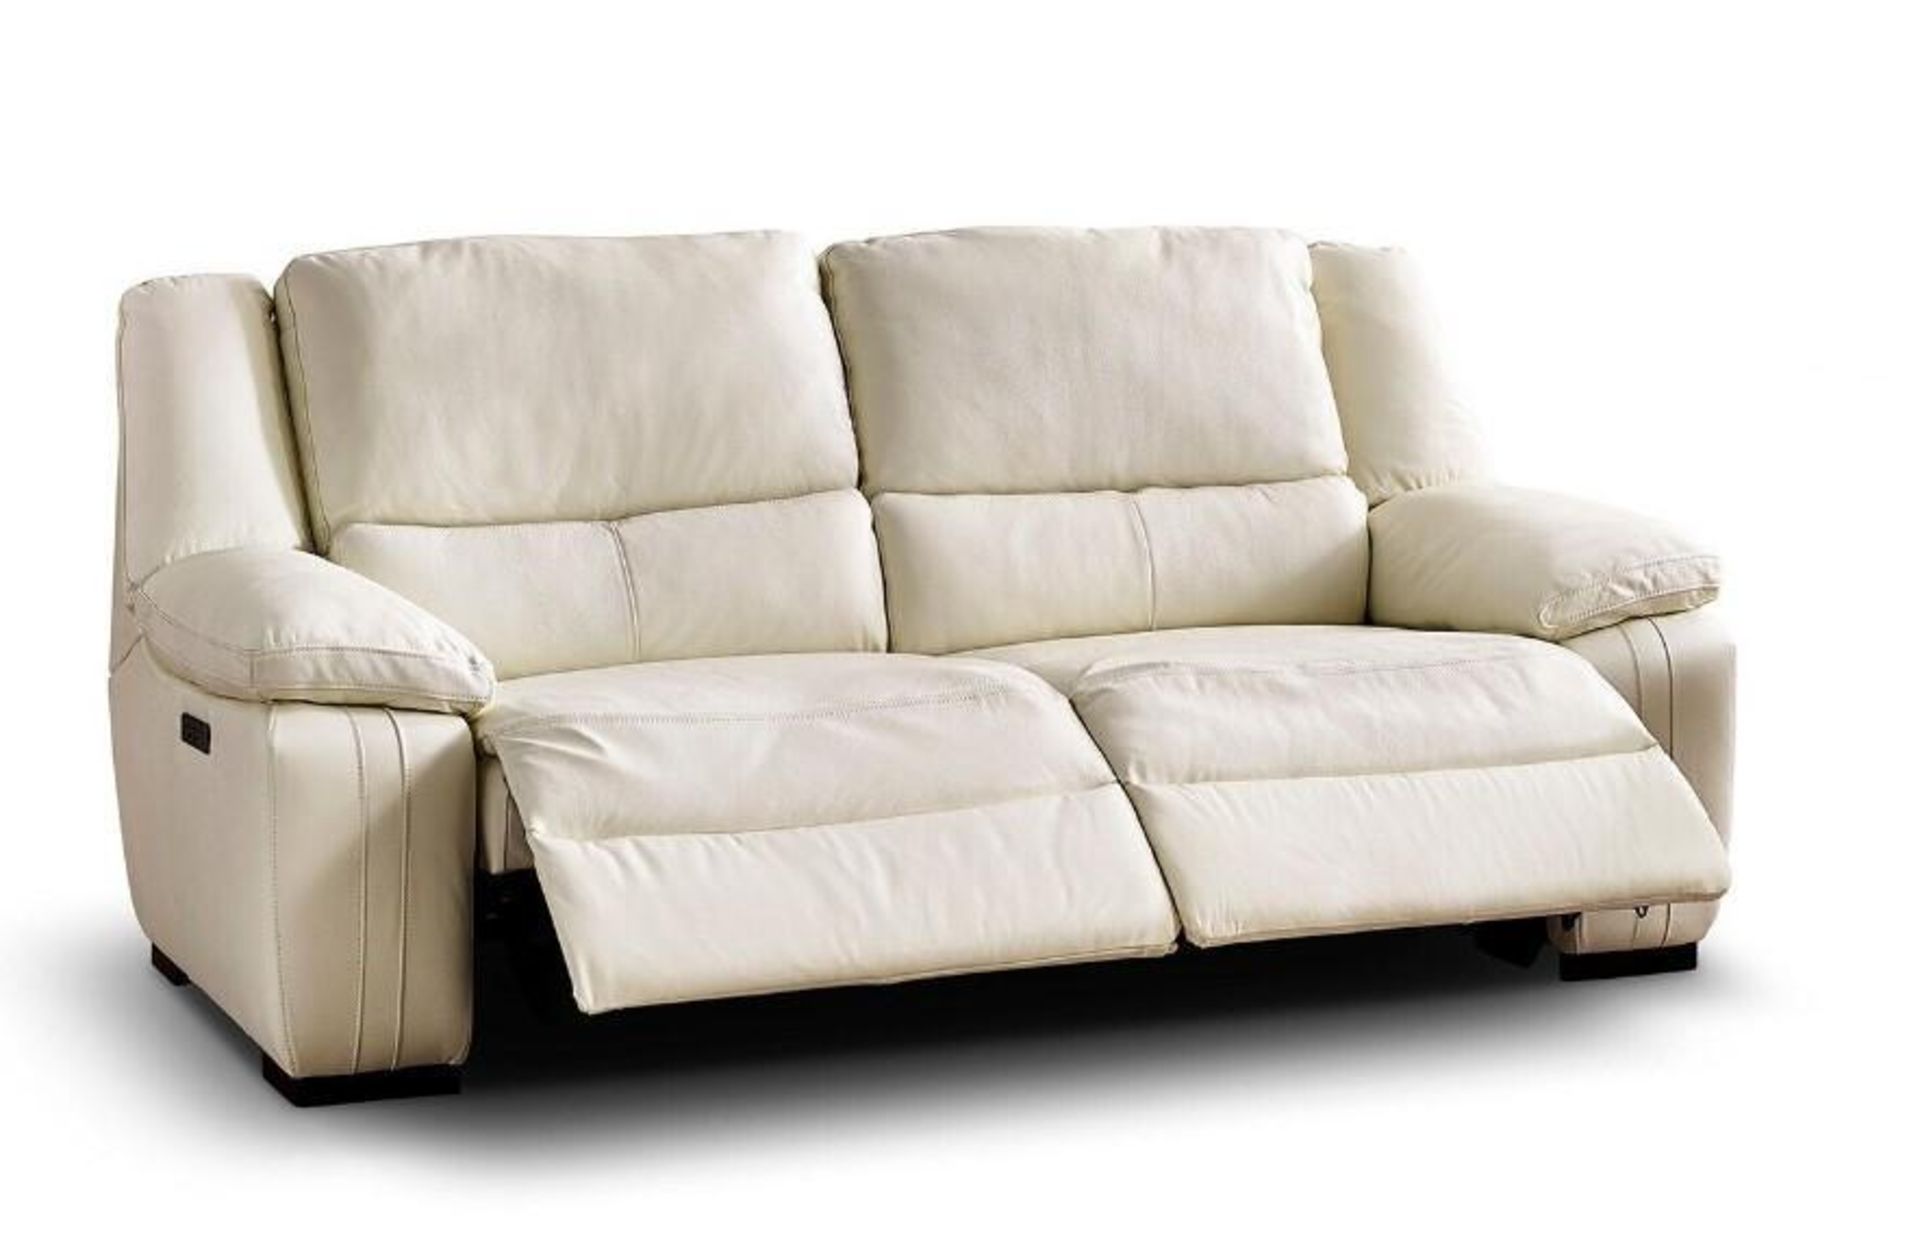 Brand new and boxed SCS Fallon 3 + 2 seater electric reclining sofa in Cream. - Image 7 of 7